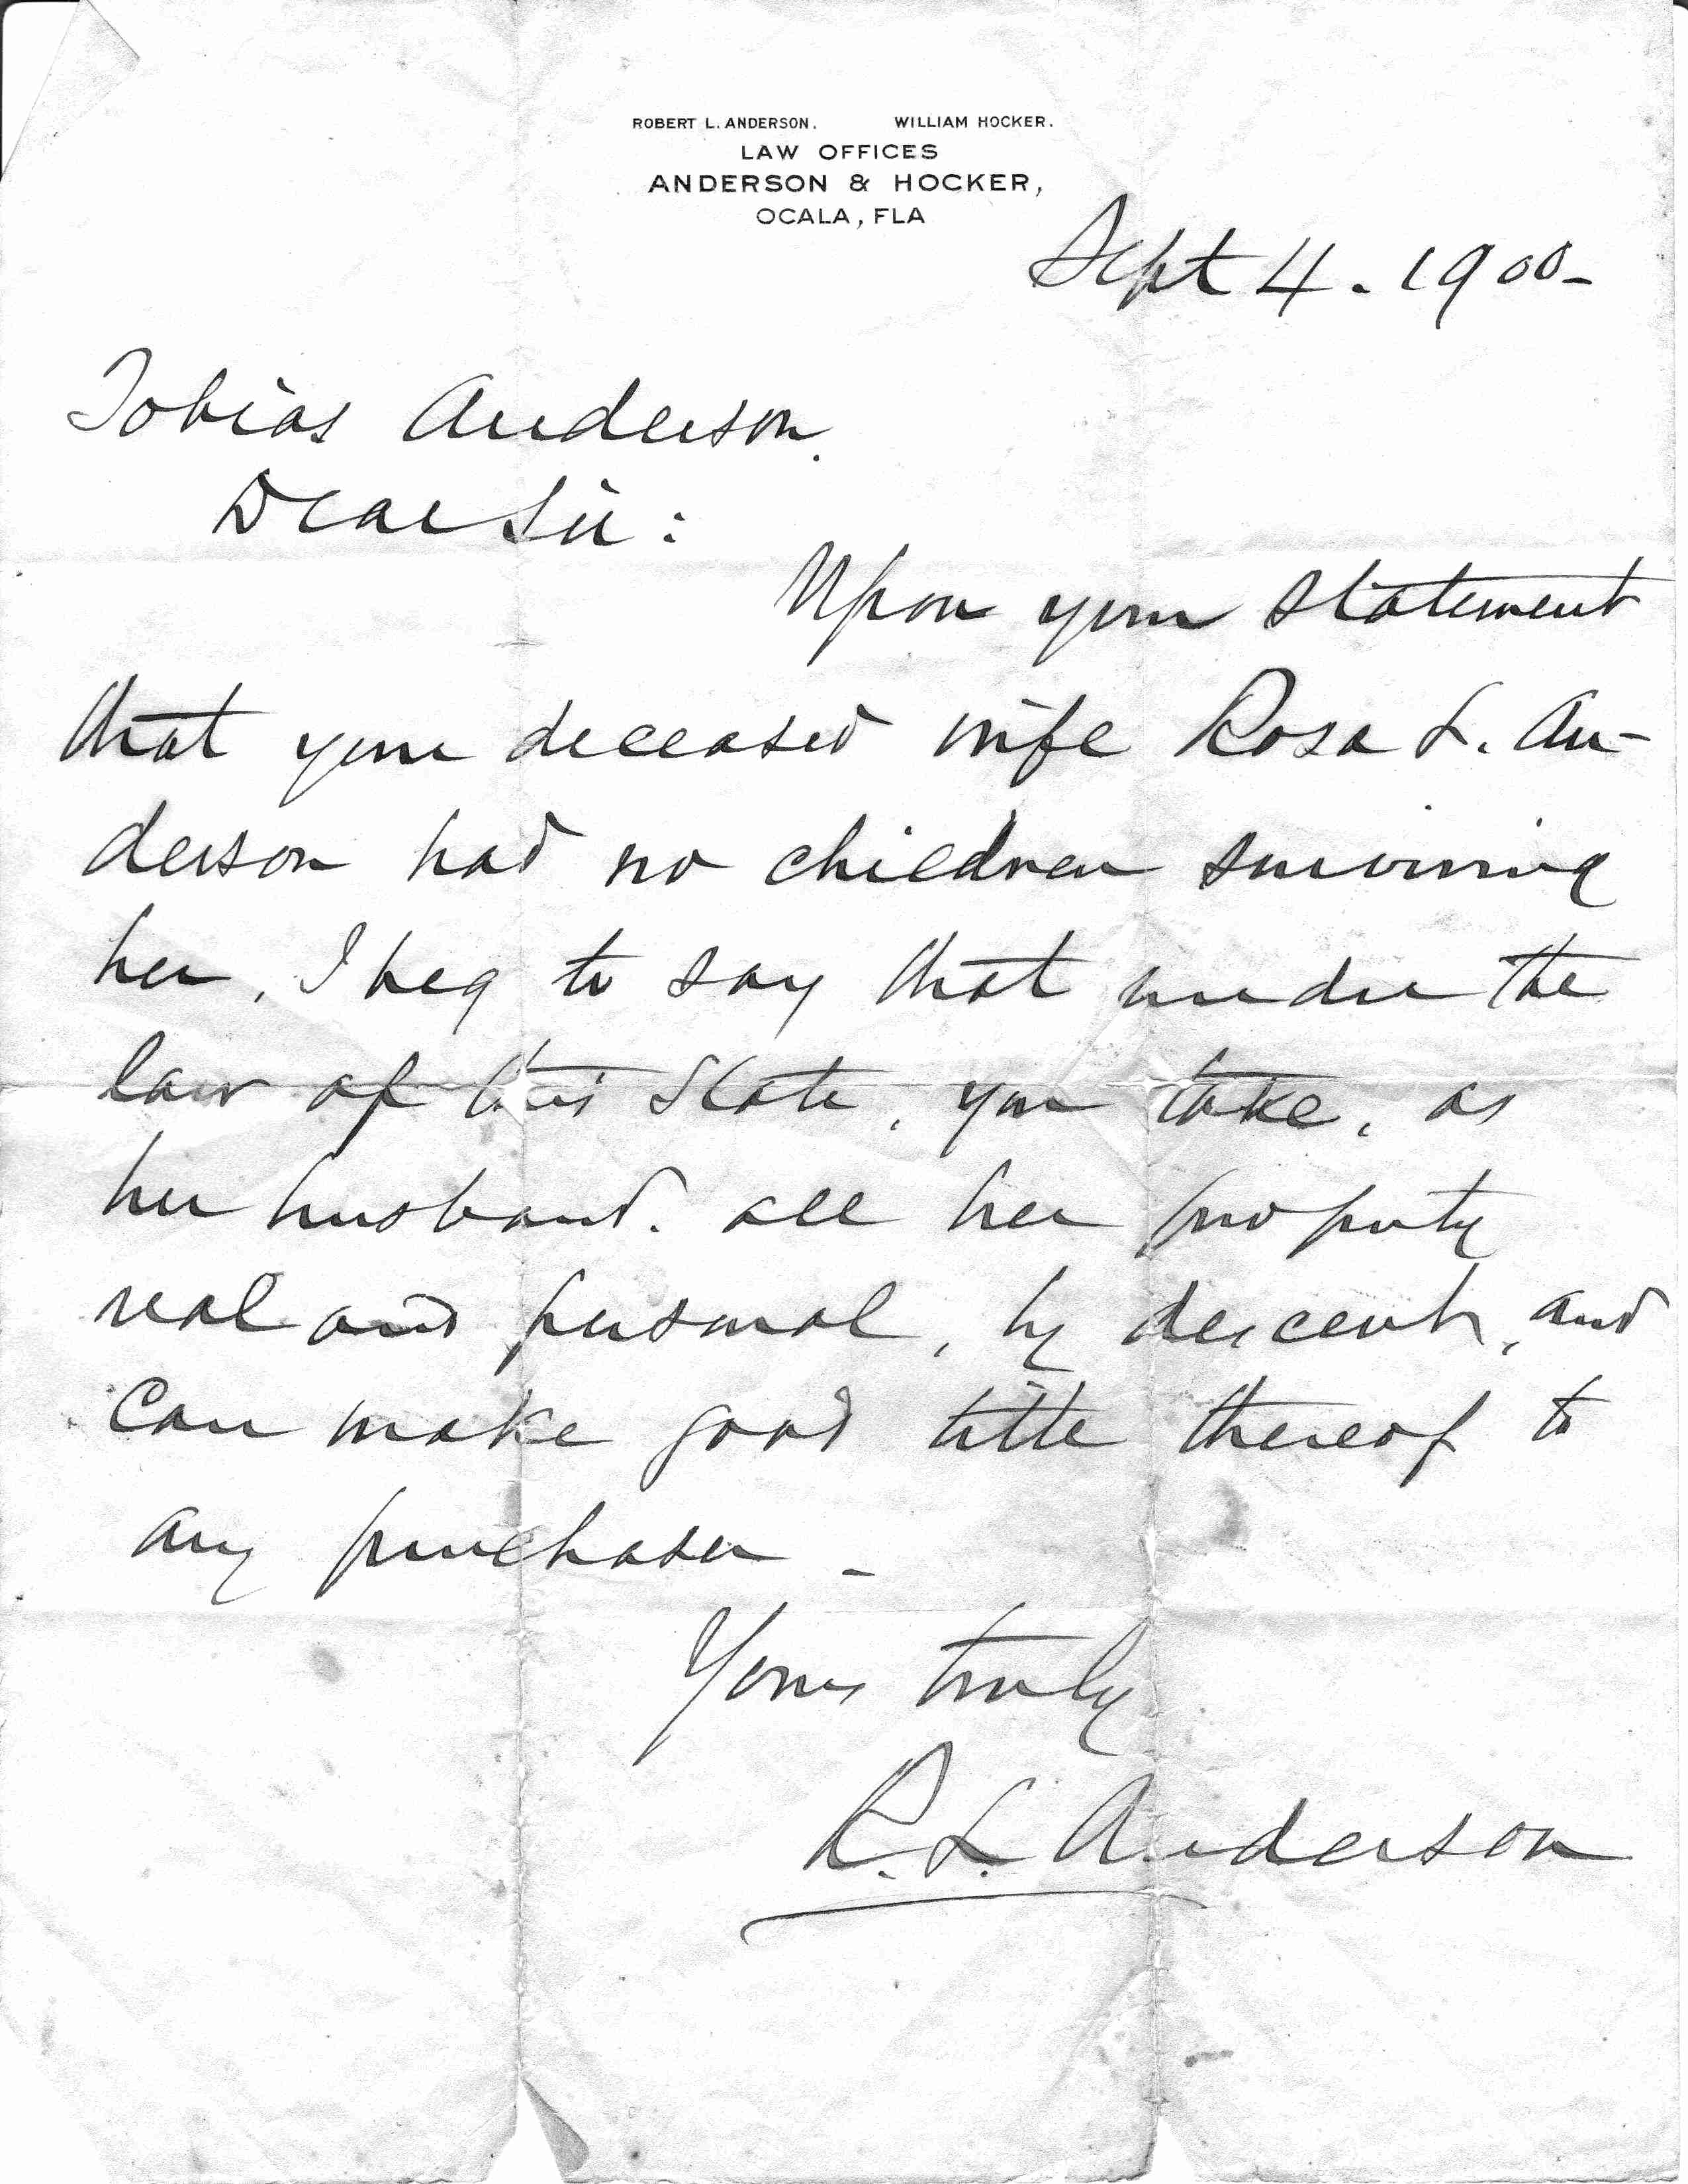 Letter from lawyer to Tobias about Rosa Lee's death stating that because she had no children all her property was his.